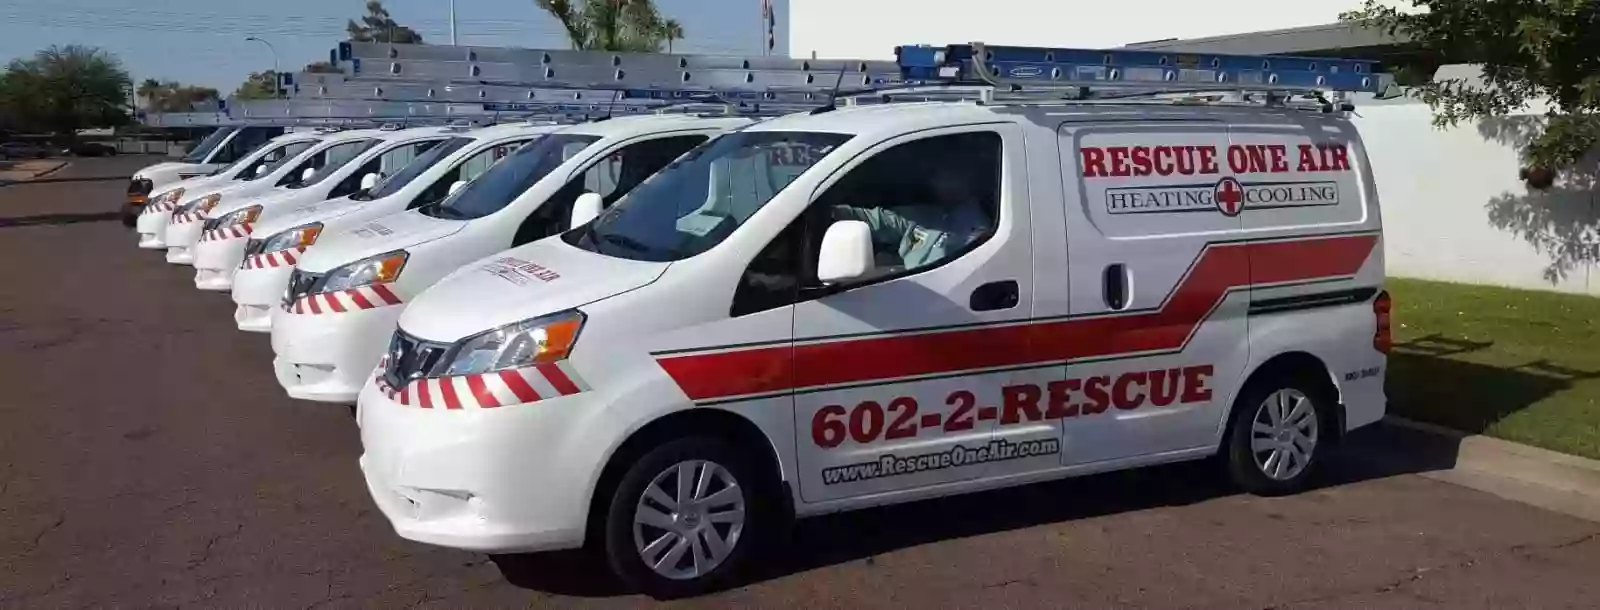 Rescue One Air Heating & Cooling